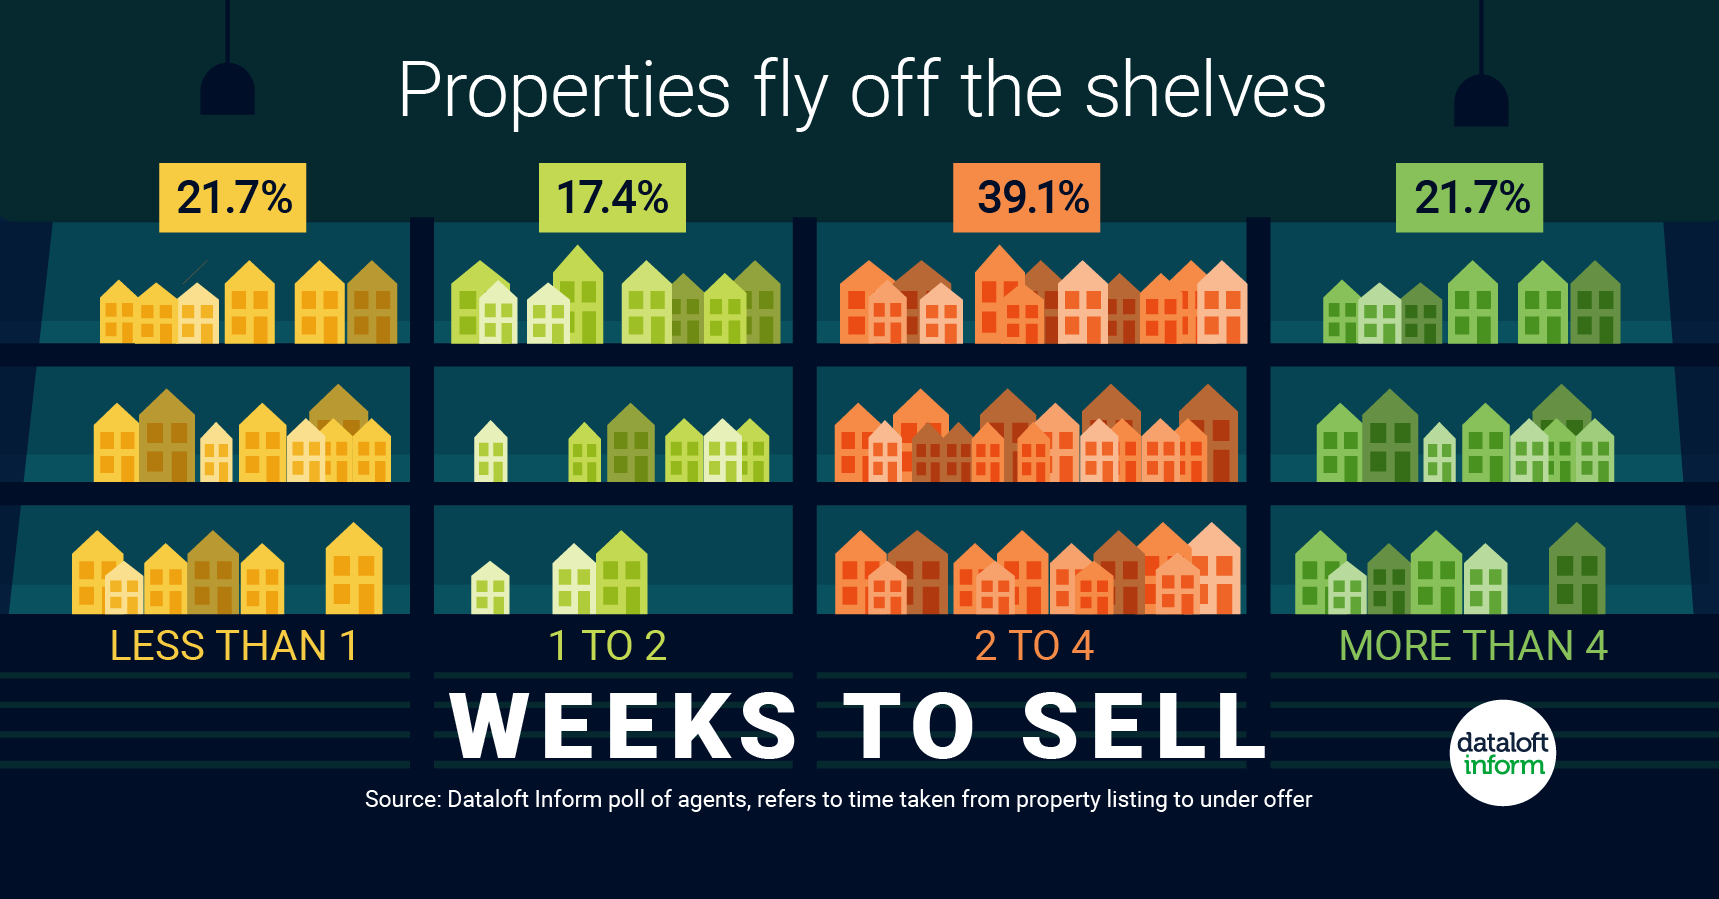 Newly listed properties are flying off the shelves